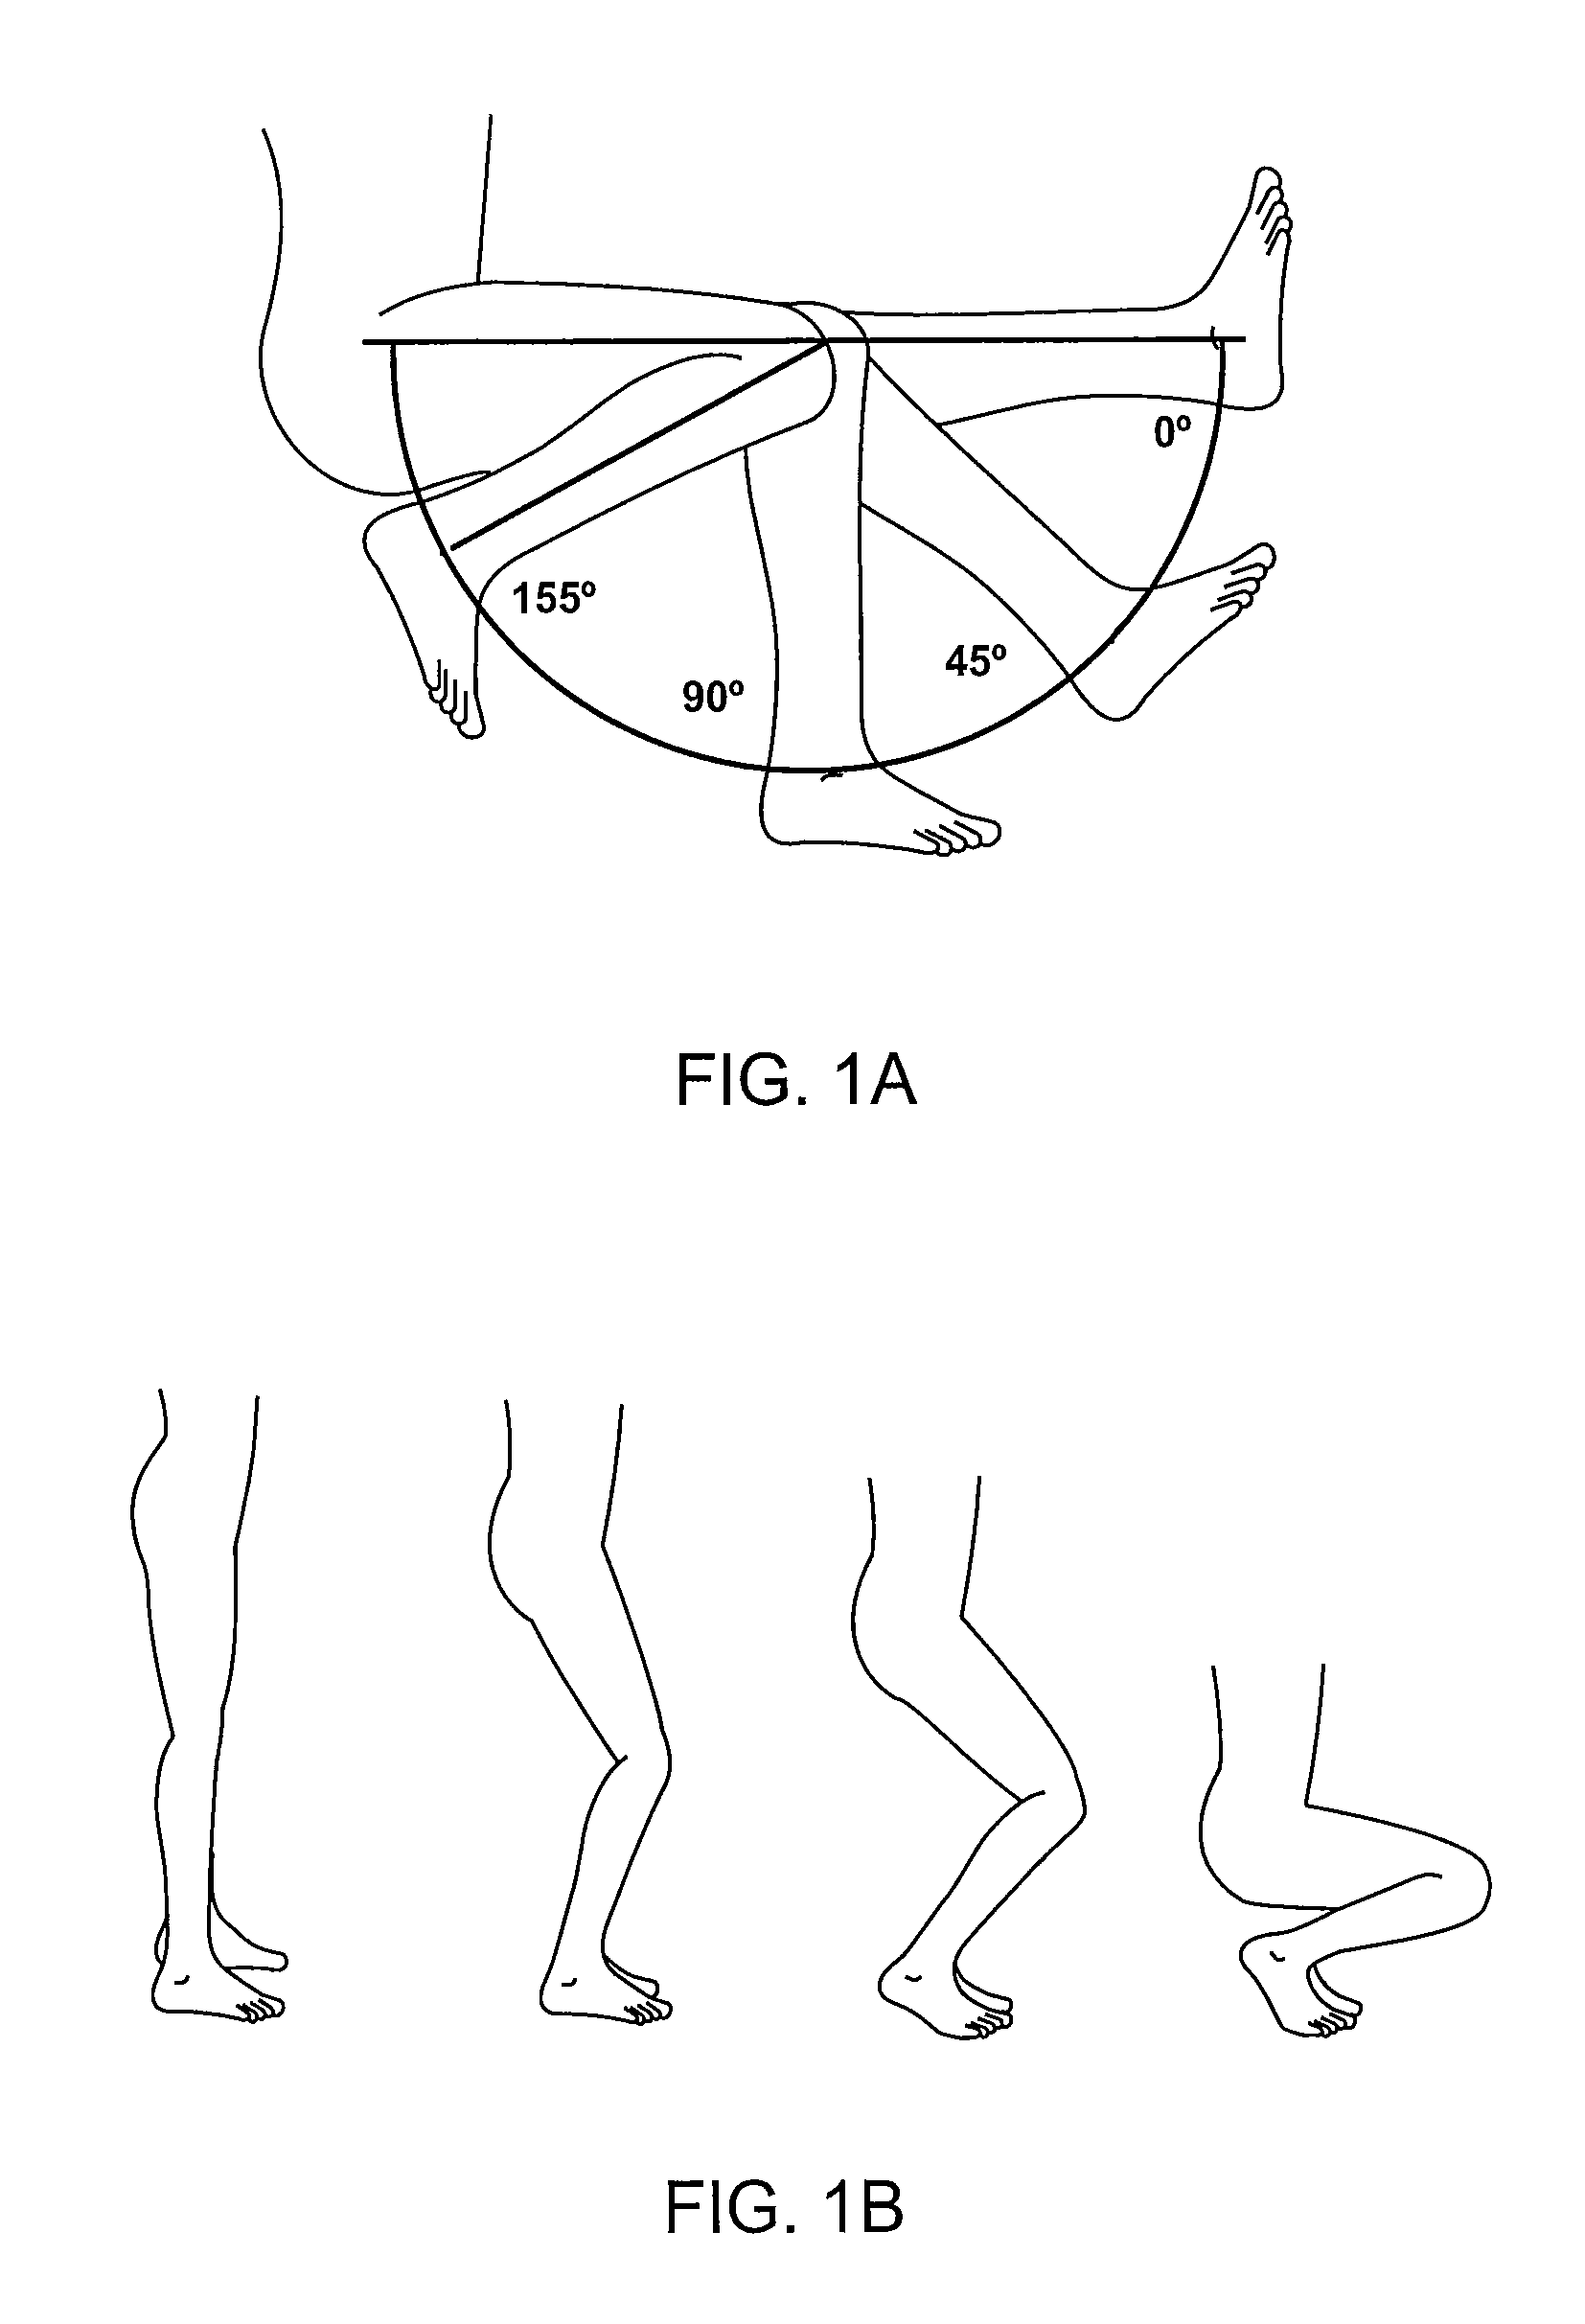 Systems and methods for providing deeper knee flexion capabilities for knee prosthesis patients